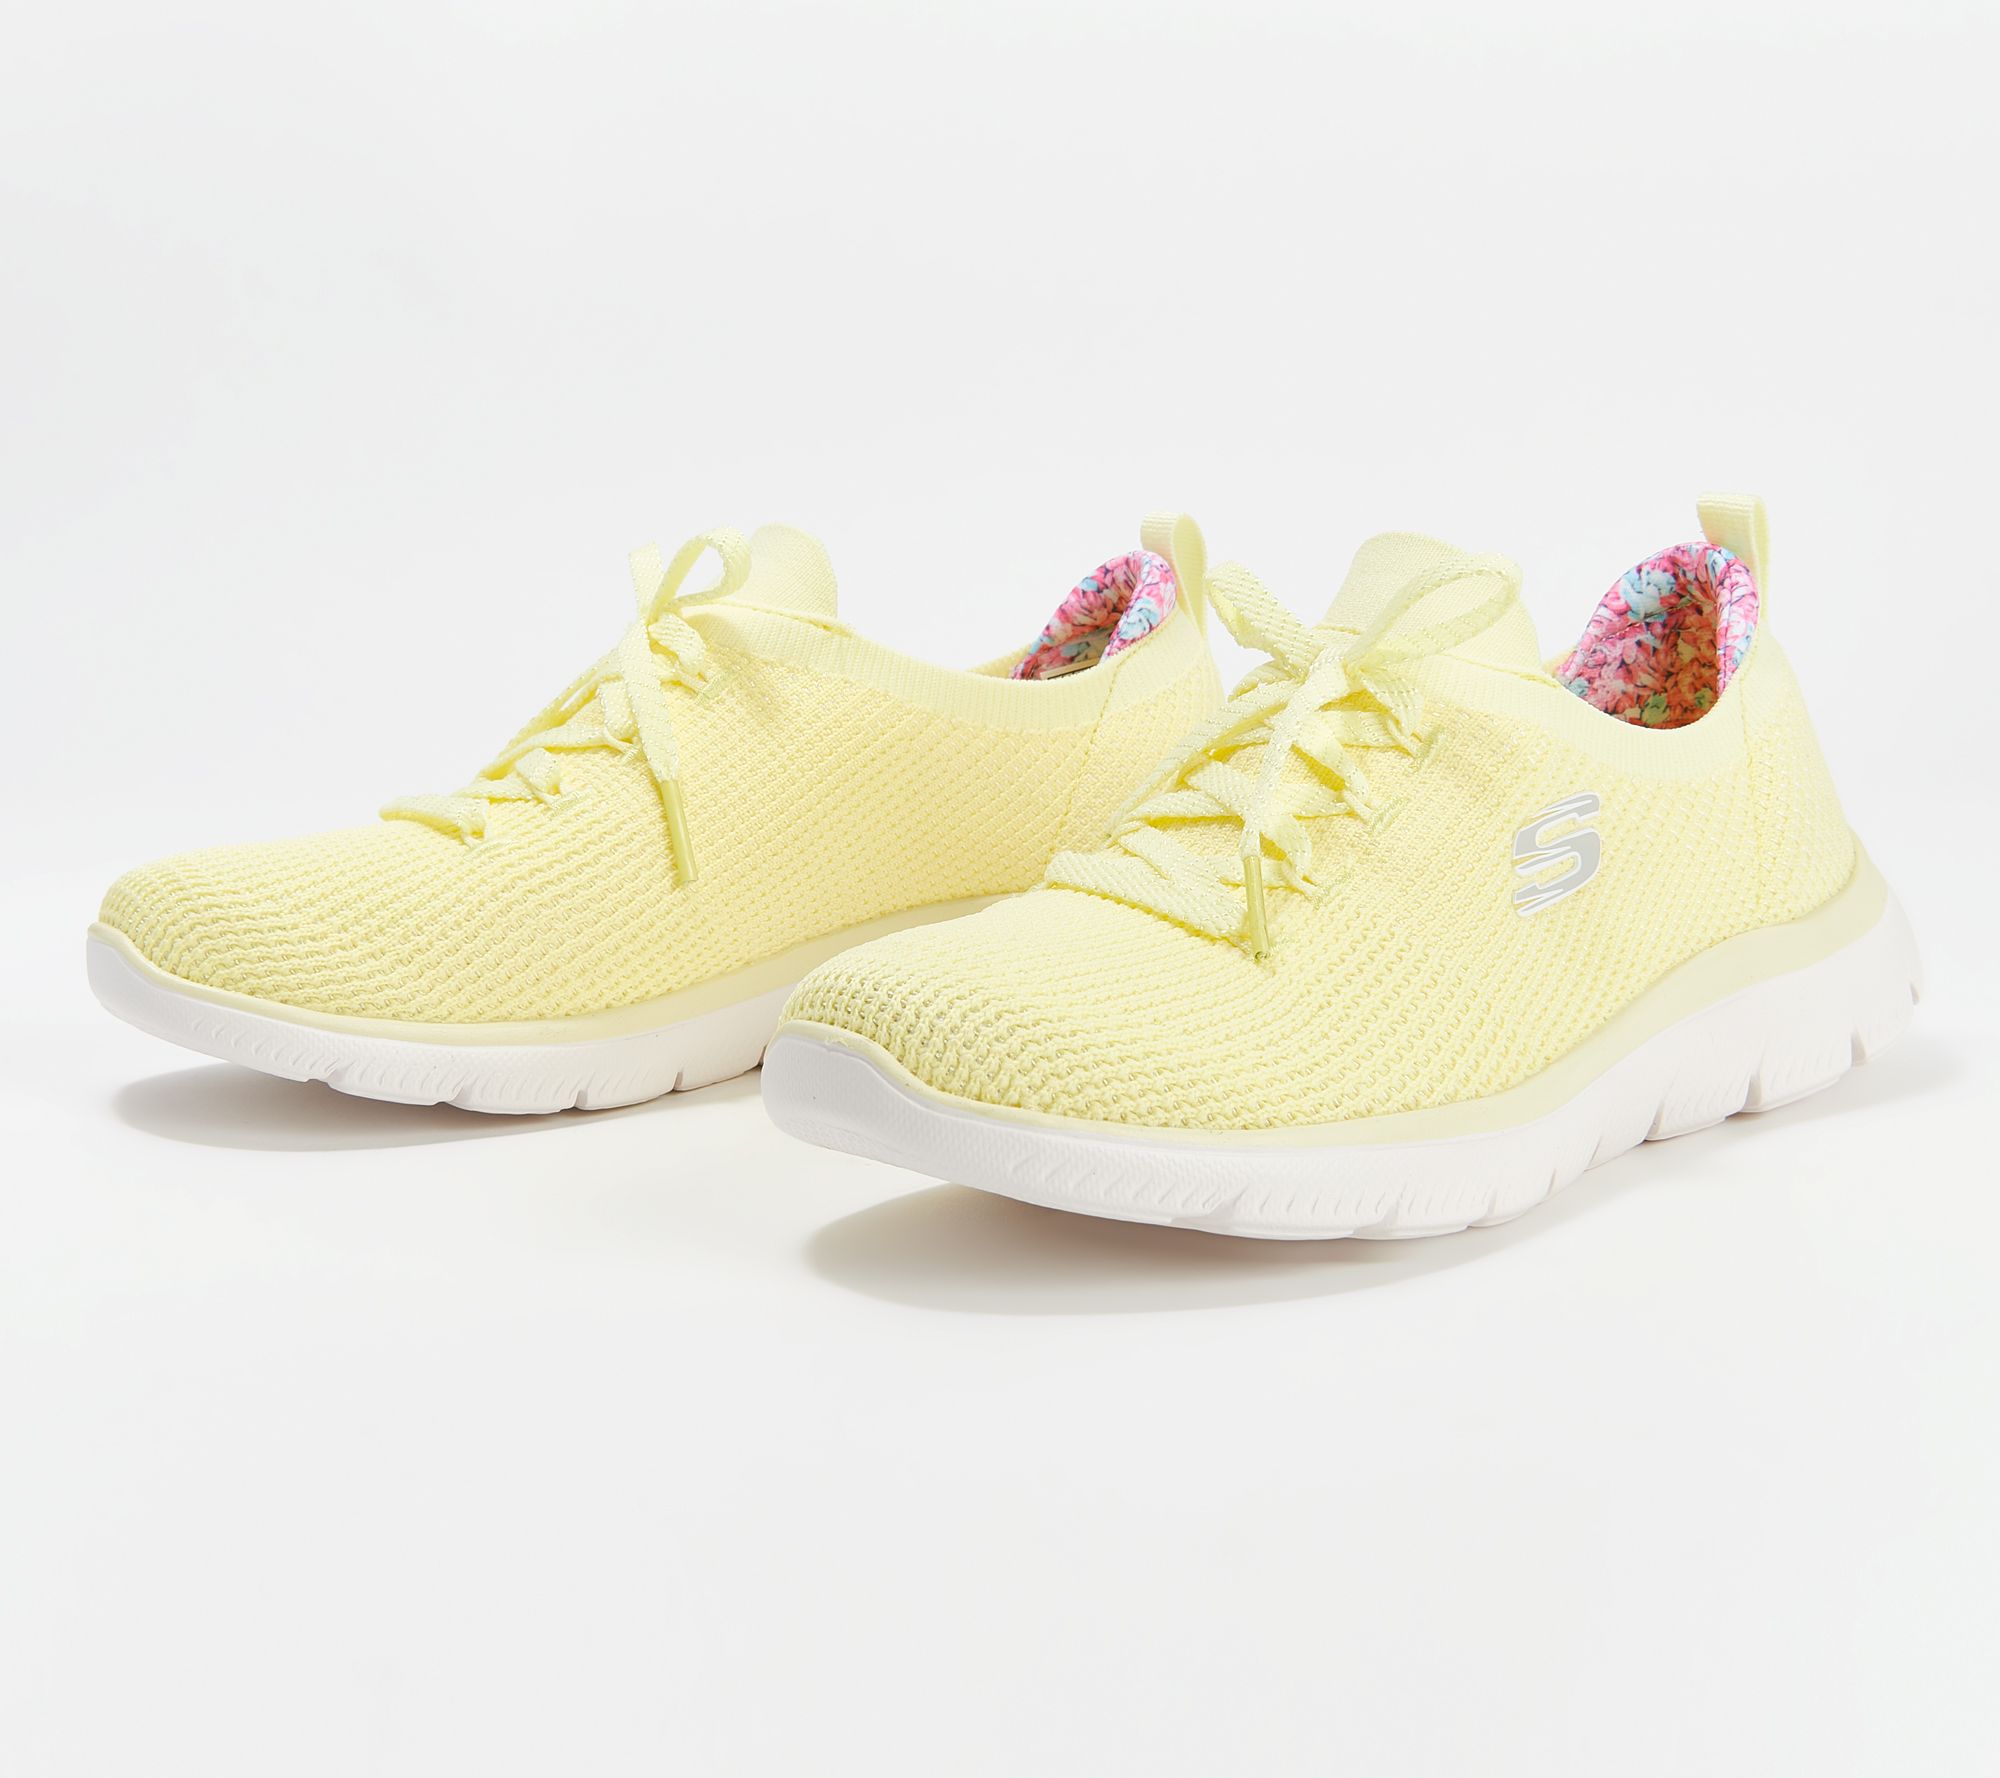 rulle eksil Kanin Skechers Faux Lace Washable Mesh Sneakers - Summits Merry Garden - QVC.com